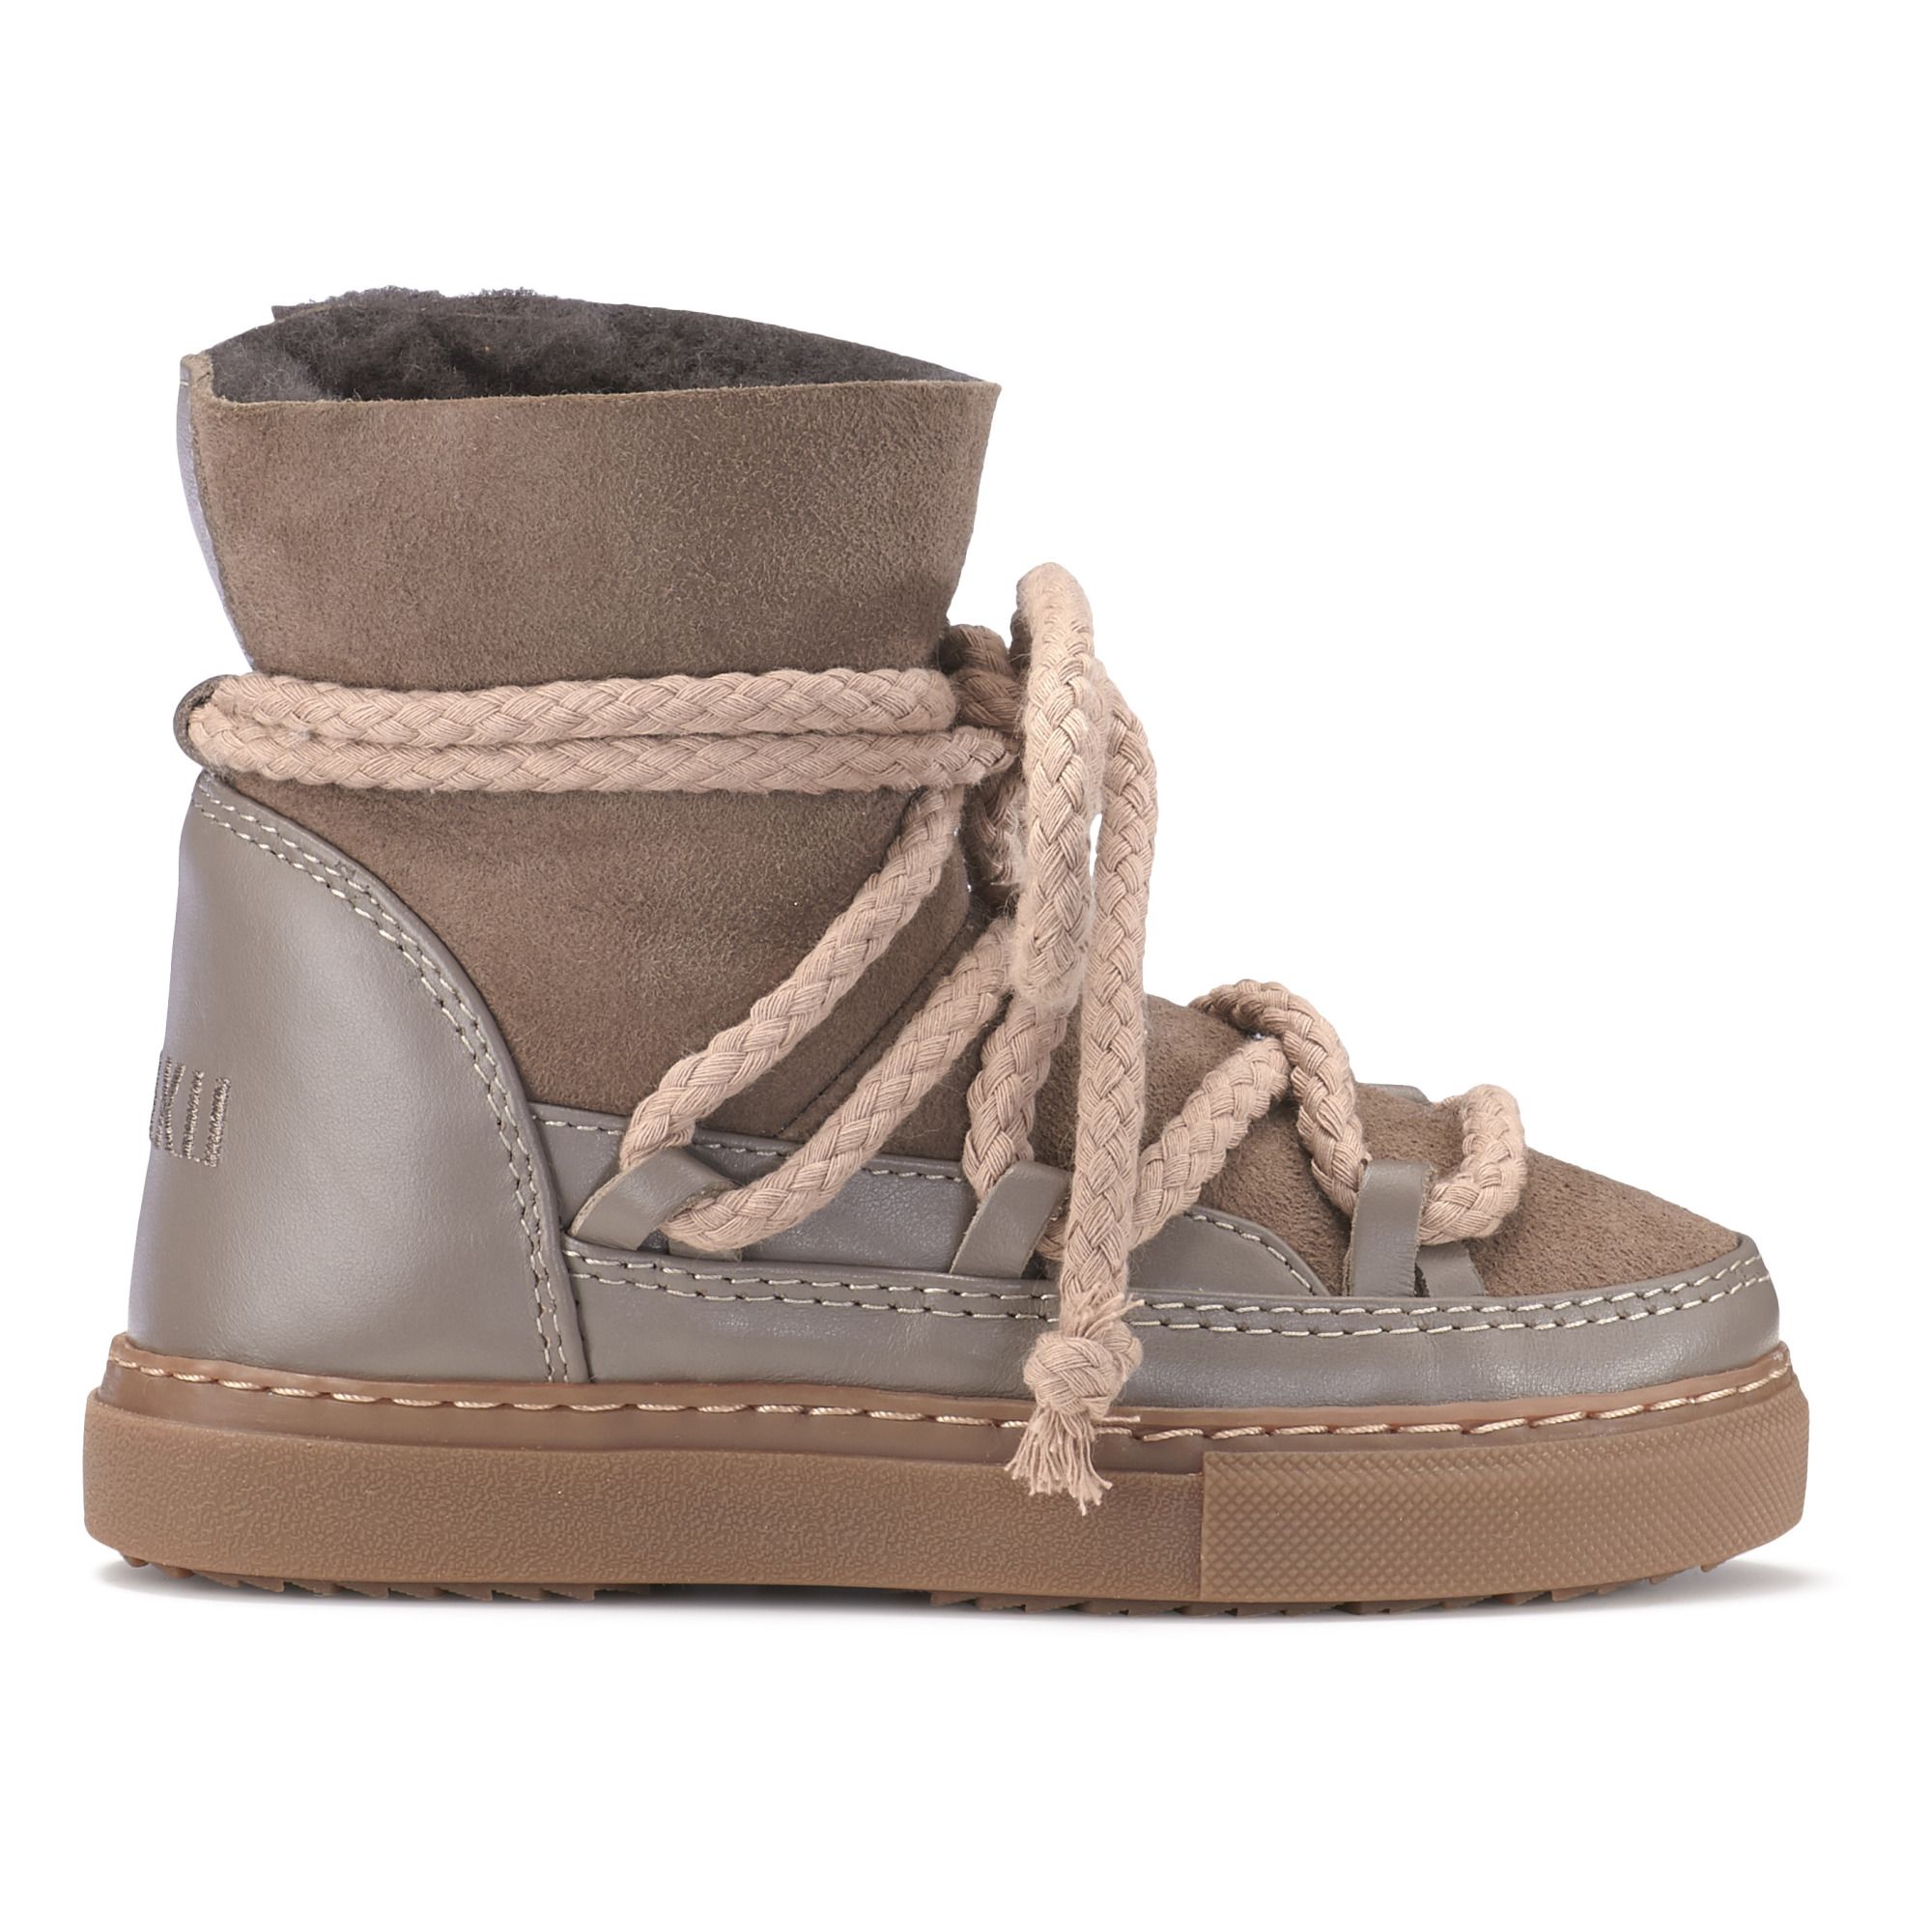 Inuikii - Sneaker Classic - Collection Enfant - - Fille - Taupe